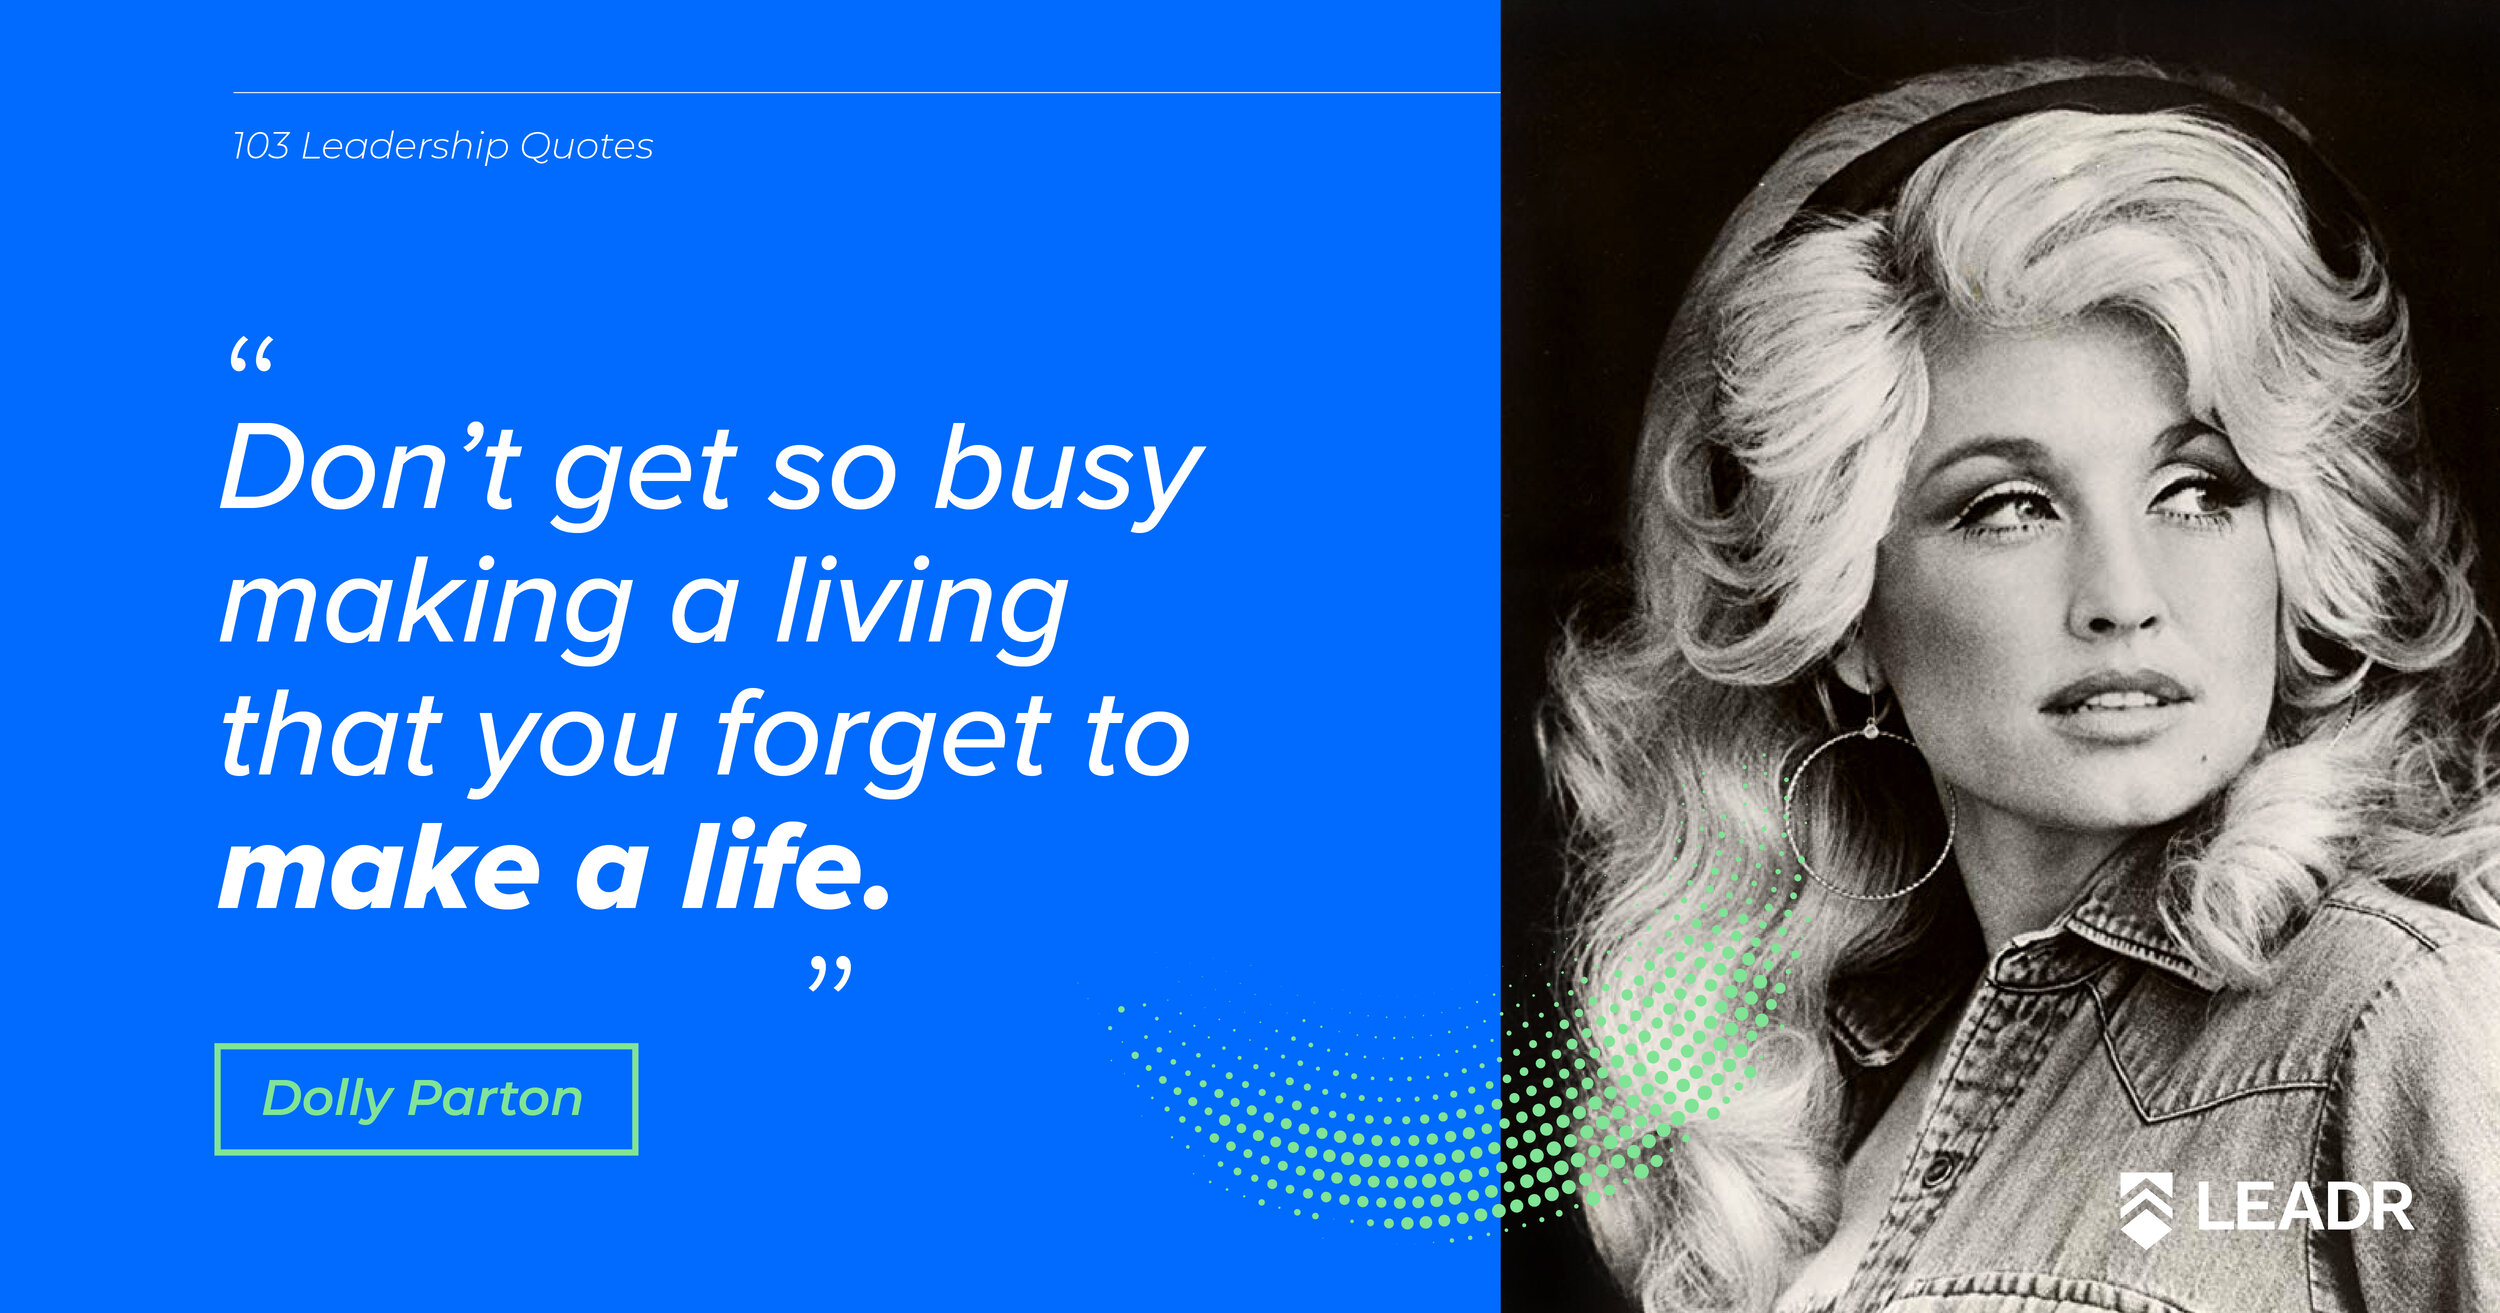 Royalty free downloadable leadership quotes - Dolly Parton